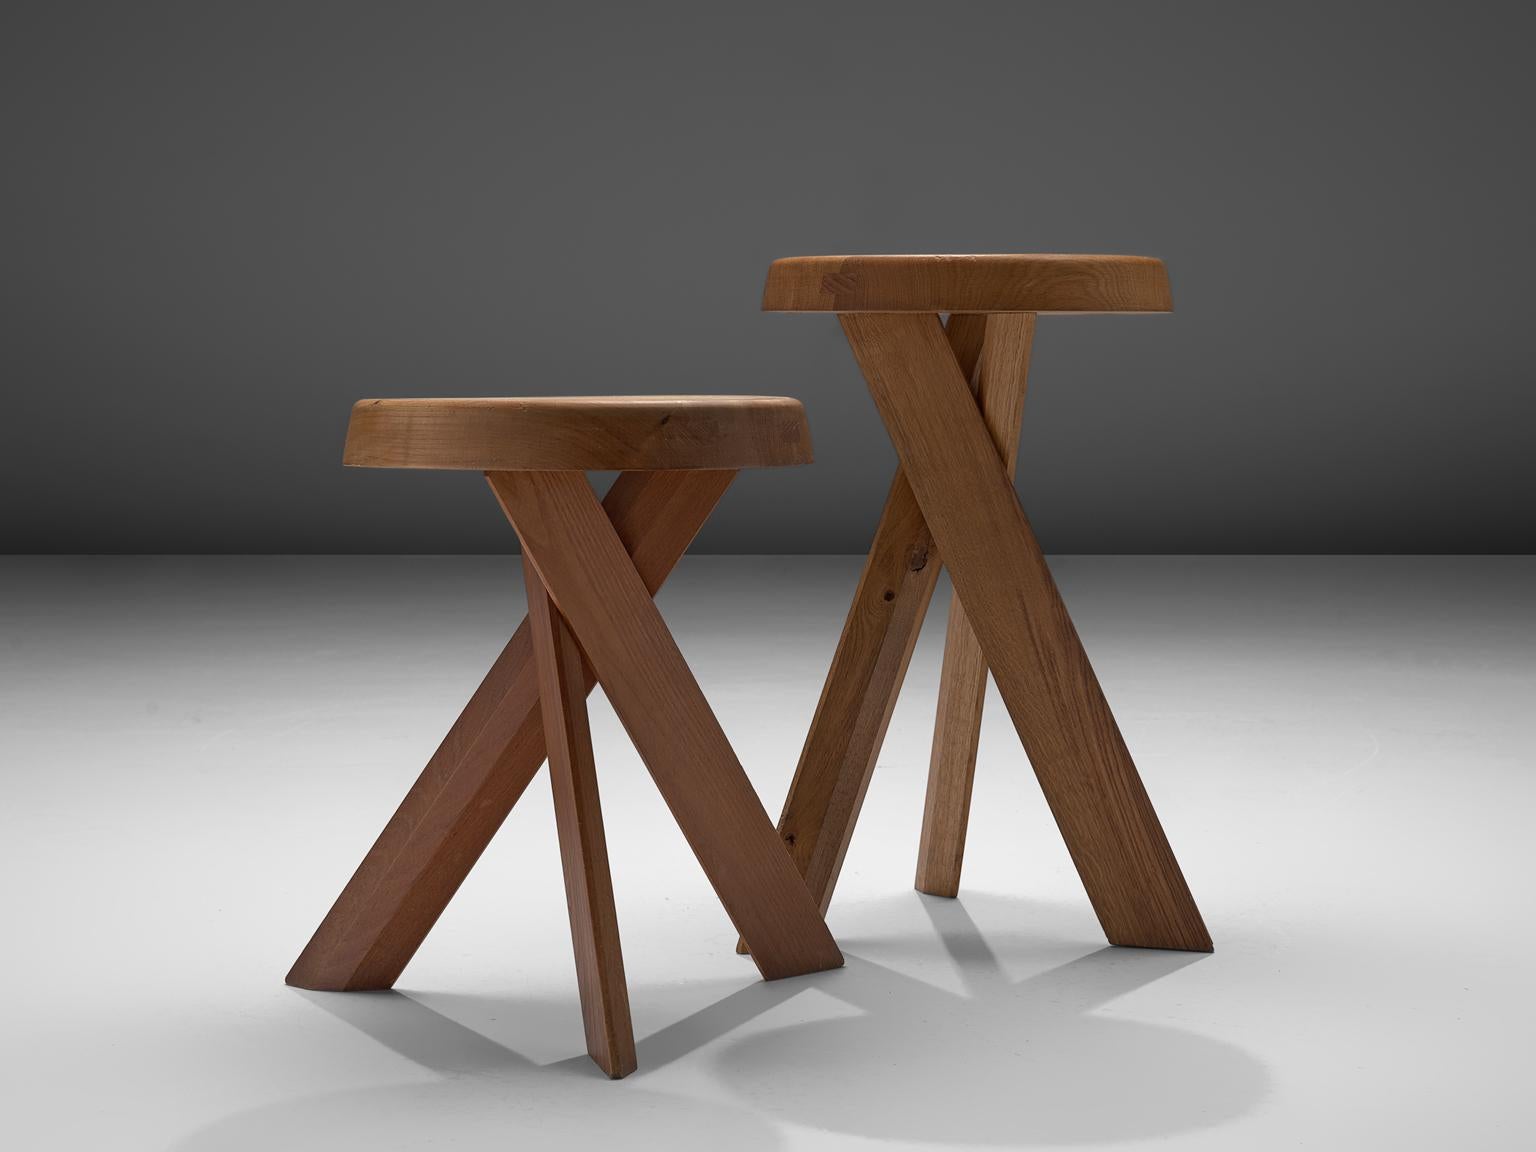 Pierre Chapo, two S31 stools of different heights, elm, France, 1960s.

These asymmetrical stools with twisted legs are an icon of Pierre Chapo's playful and solemn, solid designs. The pieces are made of solid elm and show the characteristics of